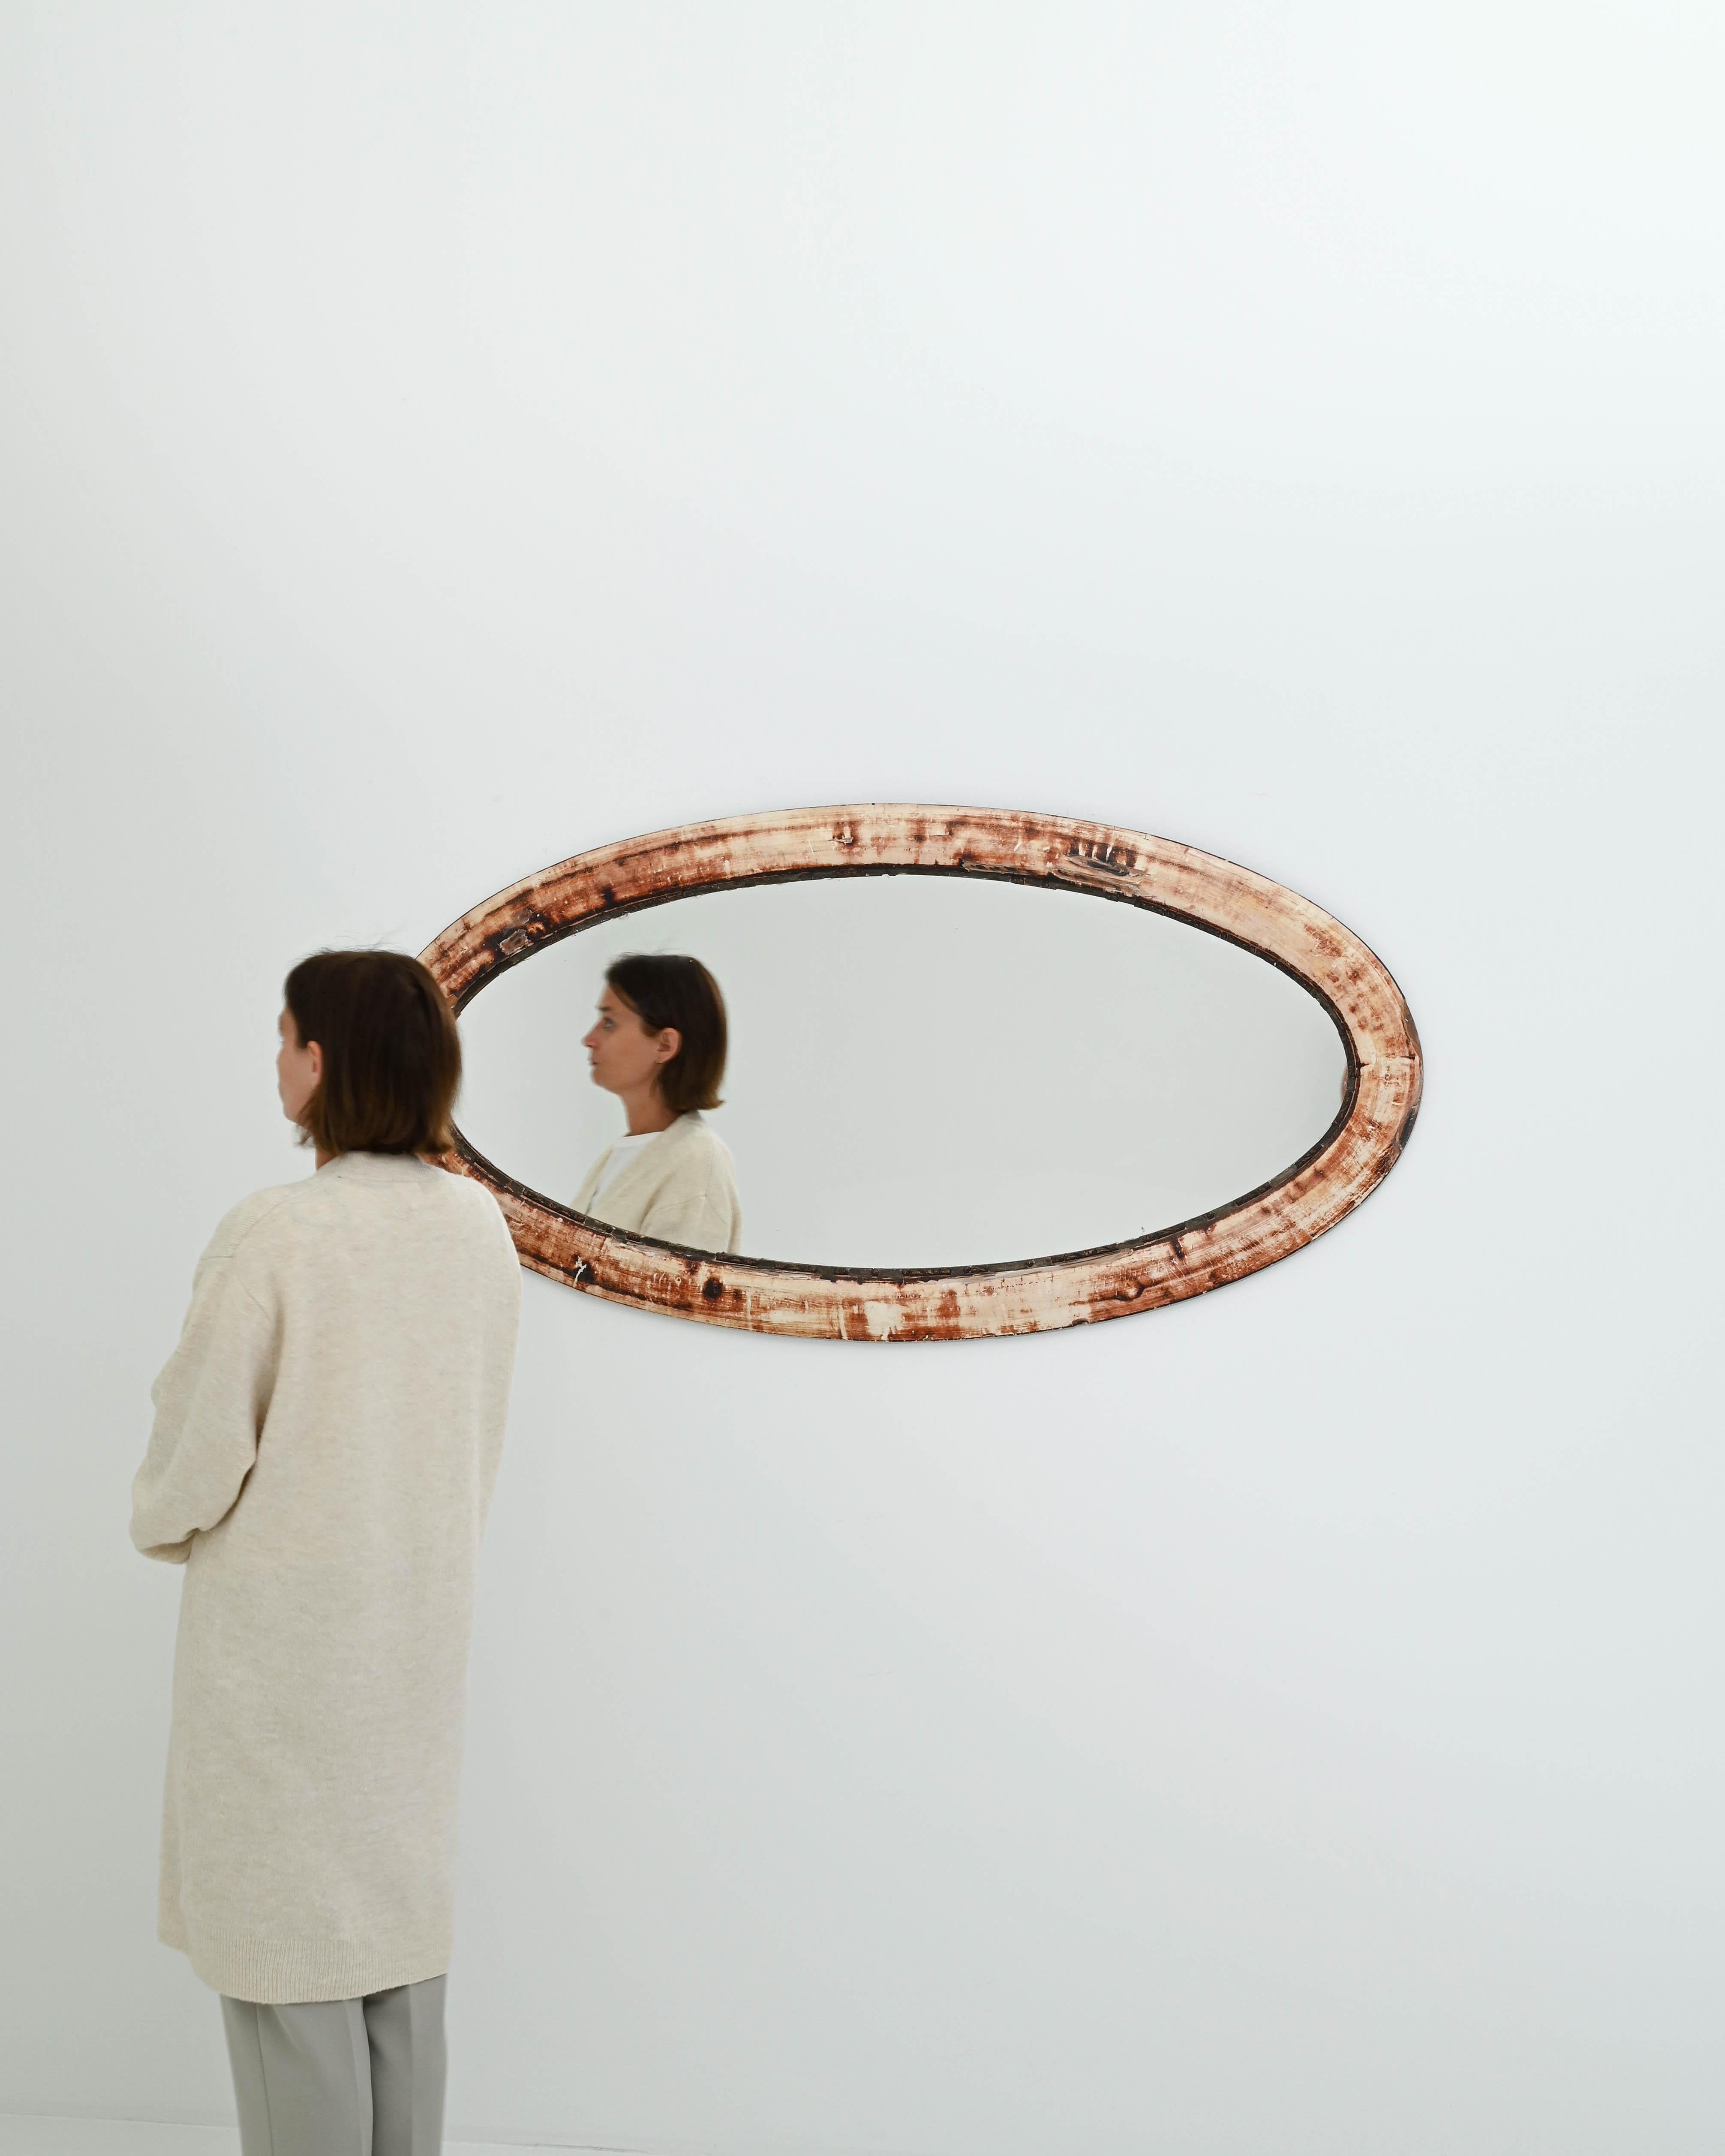 A wooden mirror created in 1930s France. A heavy patina and oval shape give this wall mirror a mysterious presence. Through time the wooden frame has developed a fiery patina, consisting of perplexing and eye-pleasing beiges, maroons, and reds.